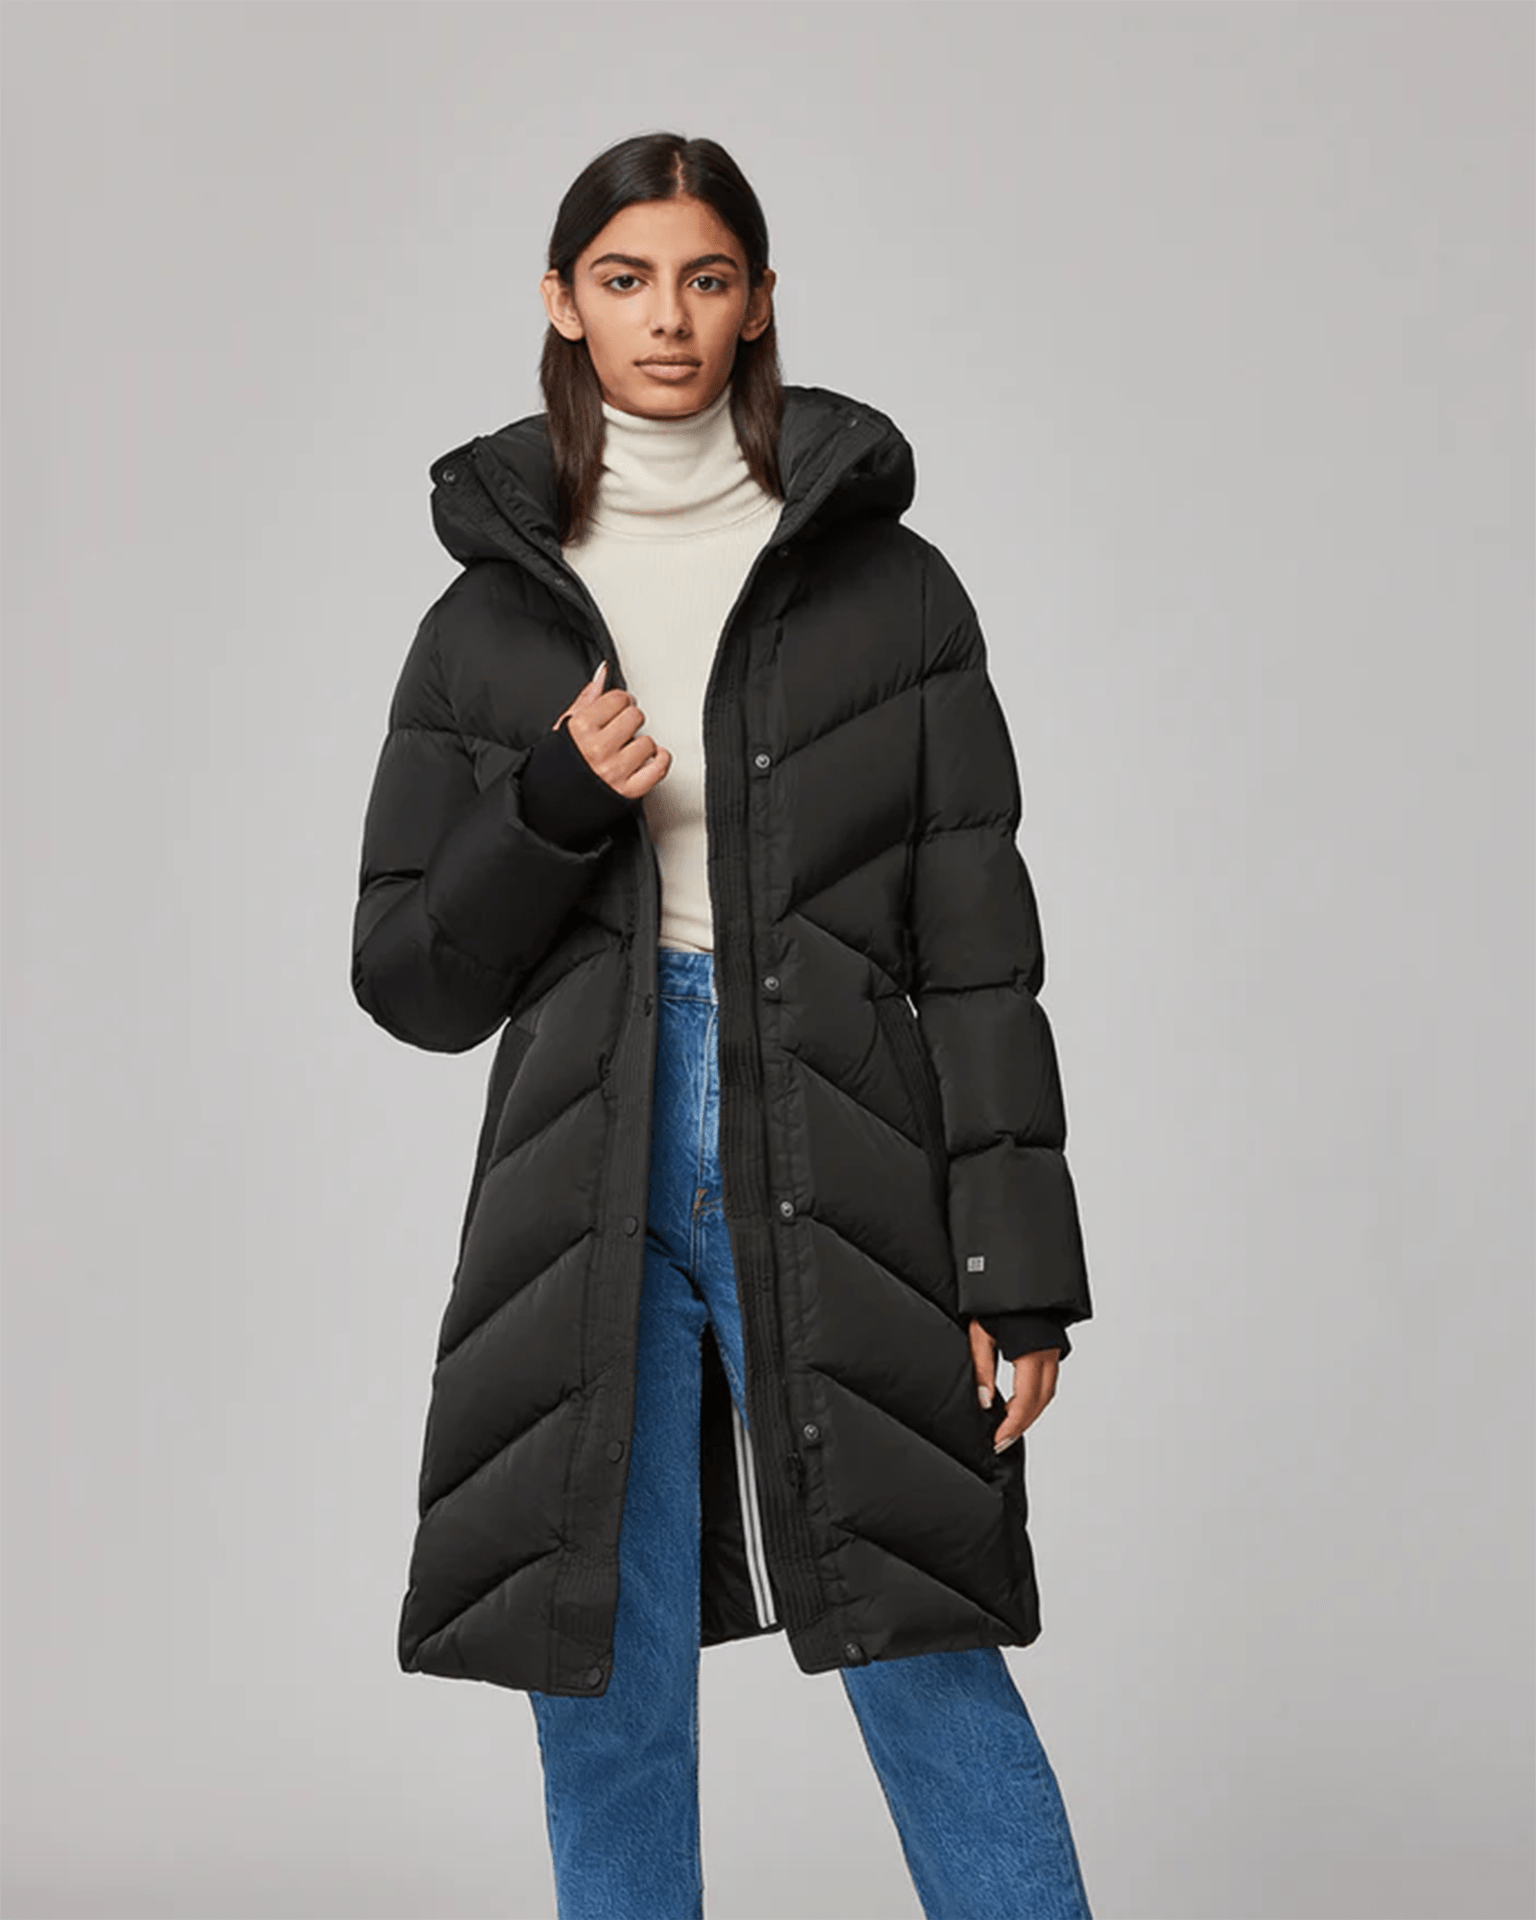 Soia & Kyo Bryanna Semi-Fitted Knee-Length Puffer in Black- Bliss